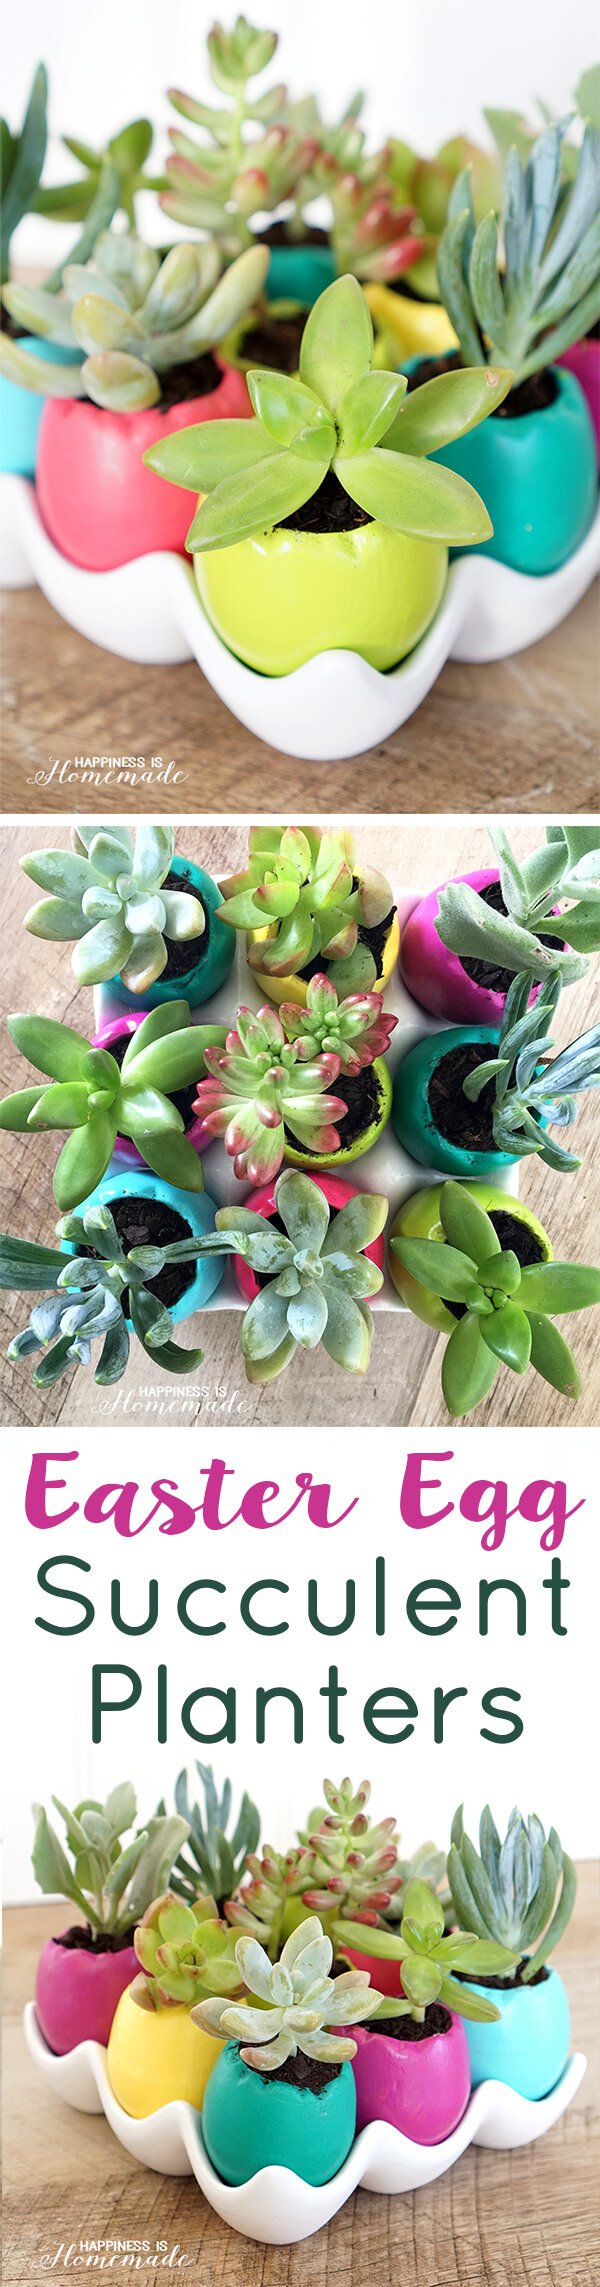 Colorful Ceramic Easter Egg Shell Succulent Planters for Spring